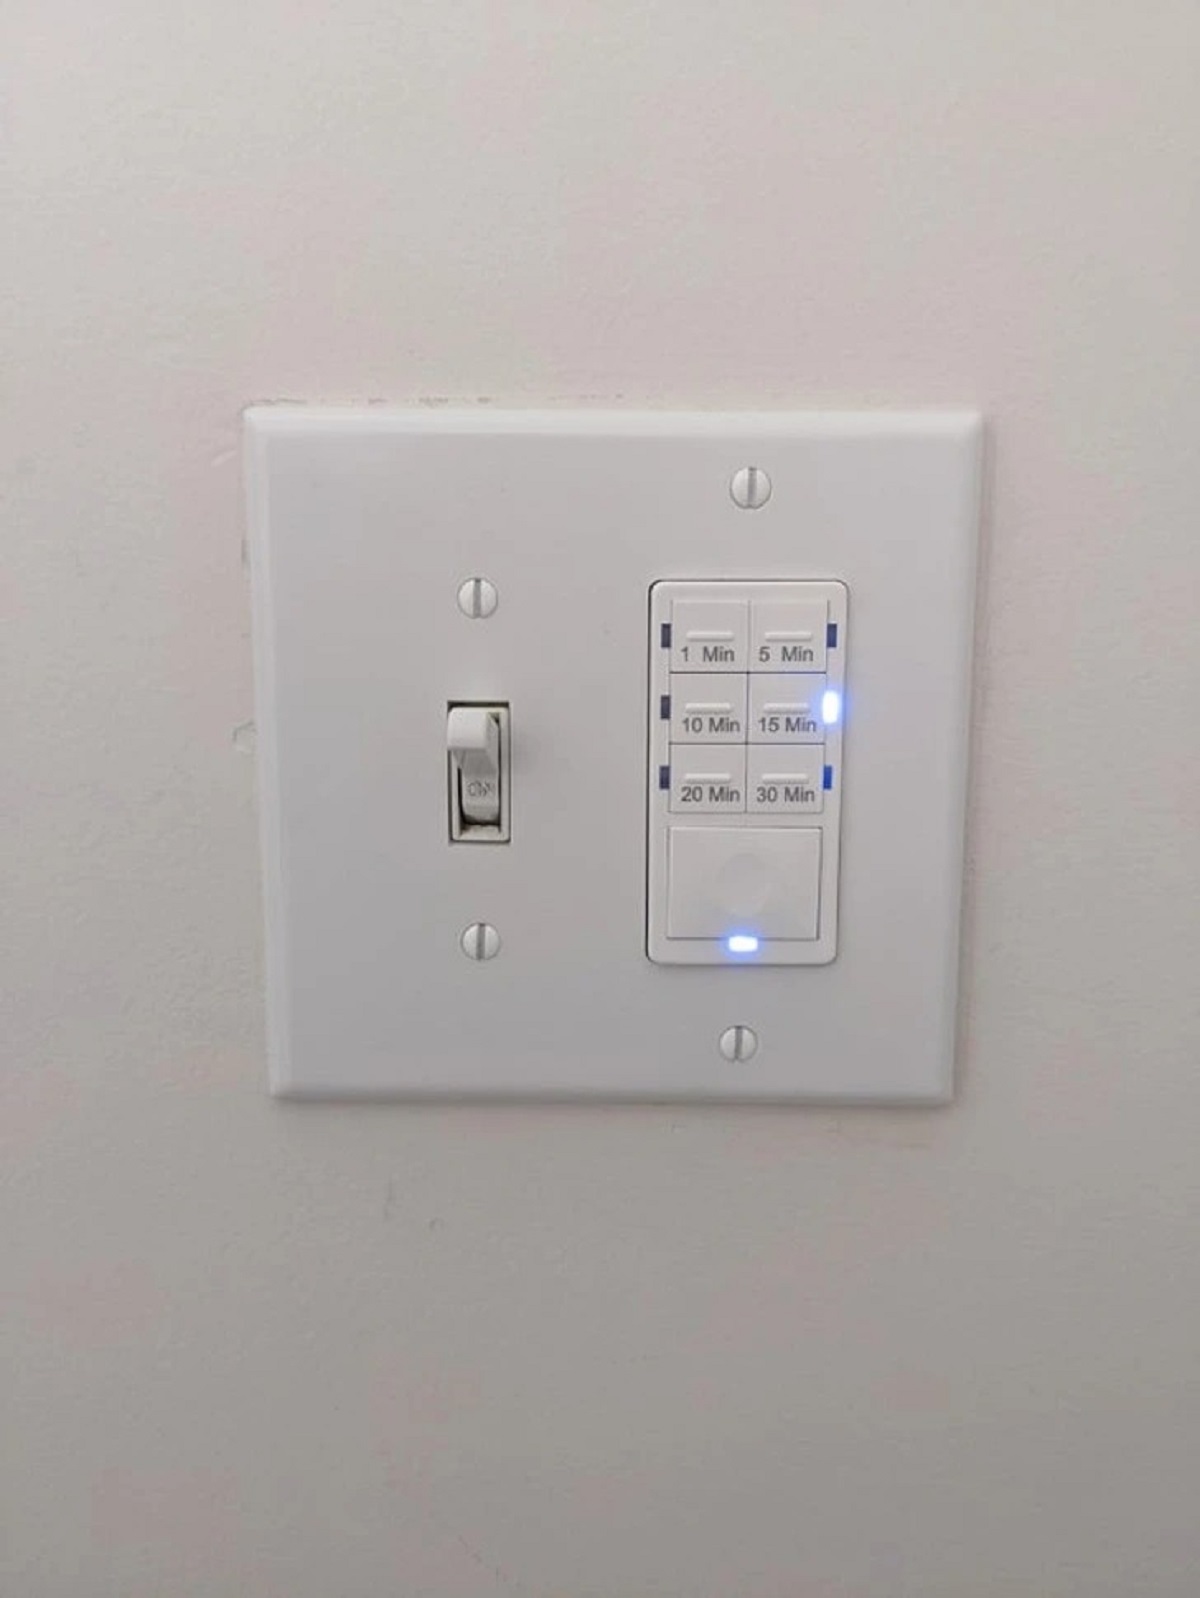 A bathroom switch with a fan timer so you can leave it running but don’t have to come back to turn it off